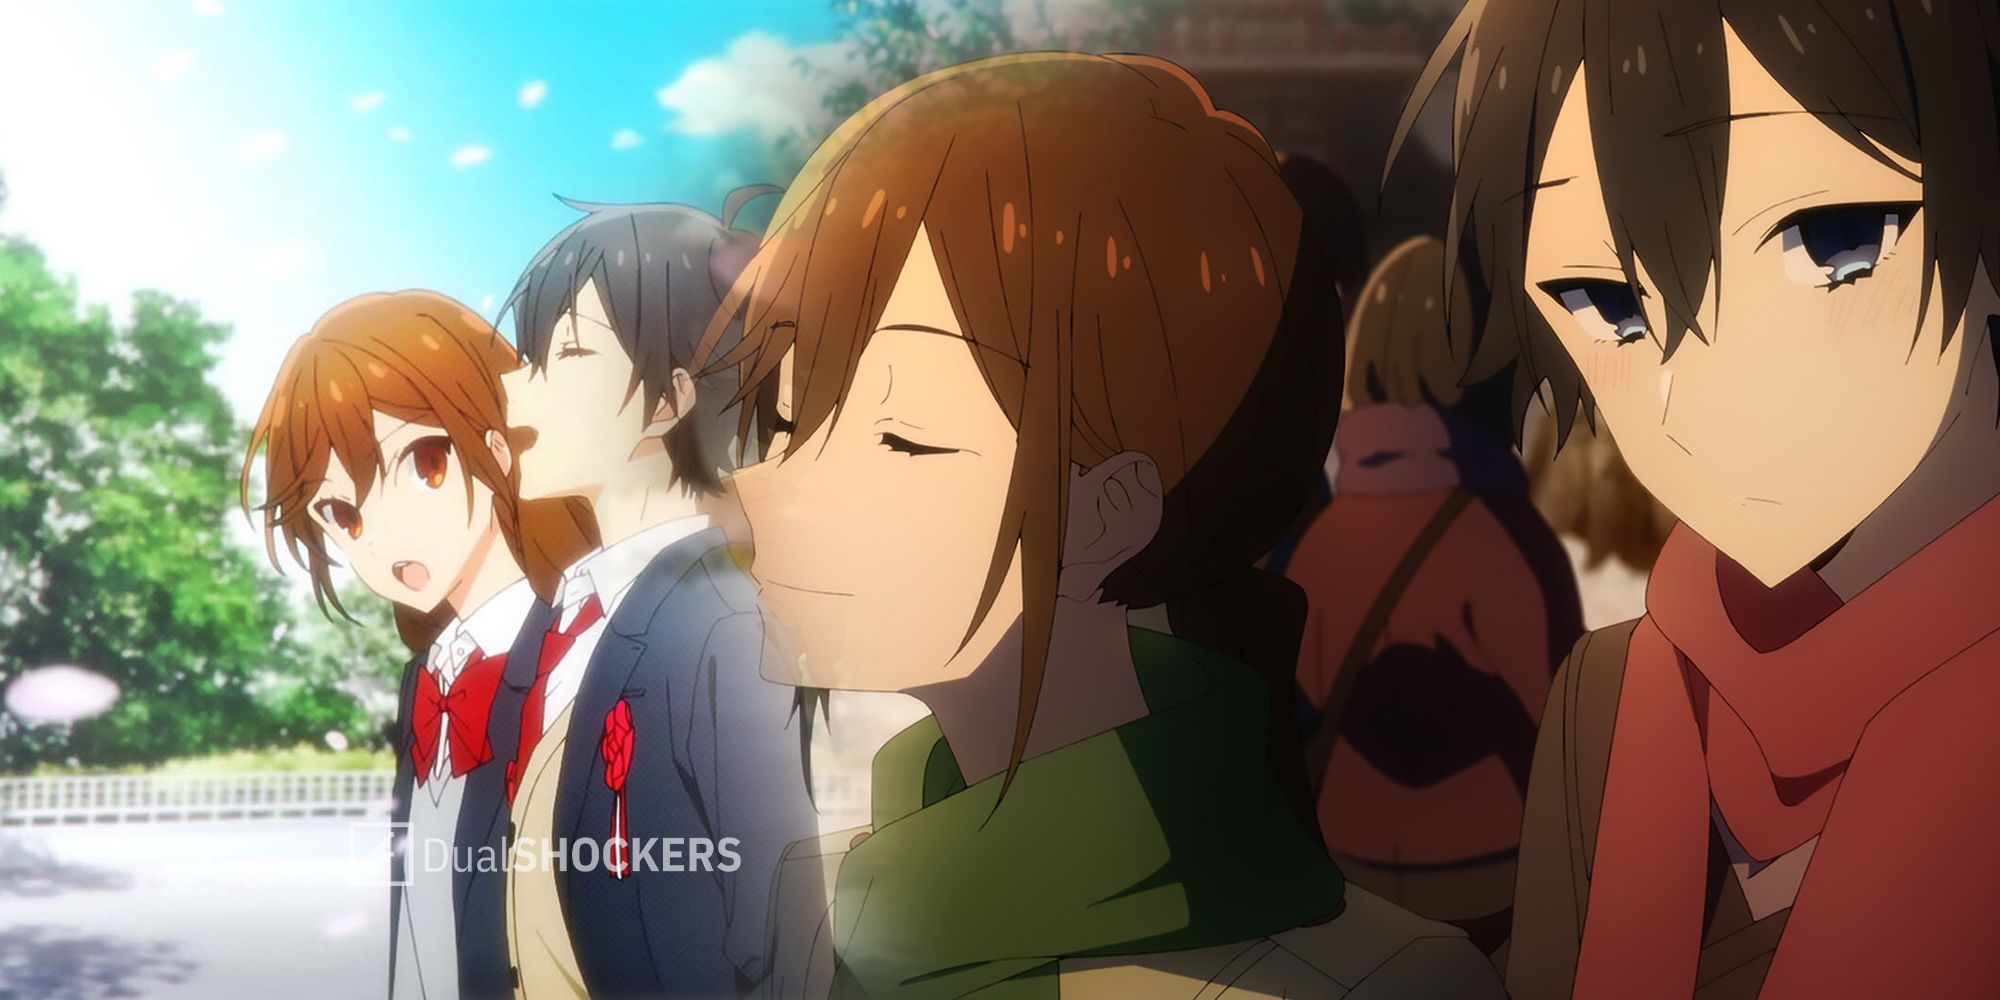 Horimiya: The Missing Pieces Anime Previewed Ahead of July 1 Premiere